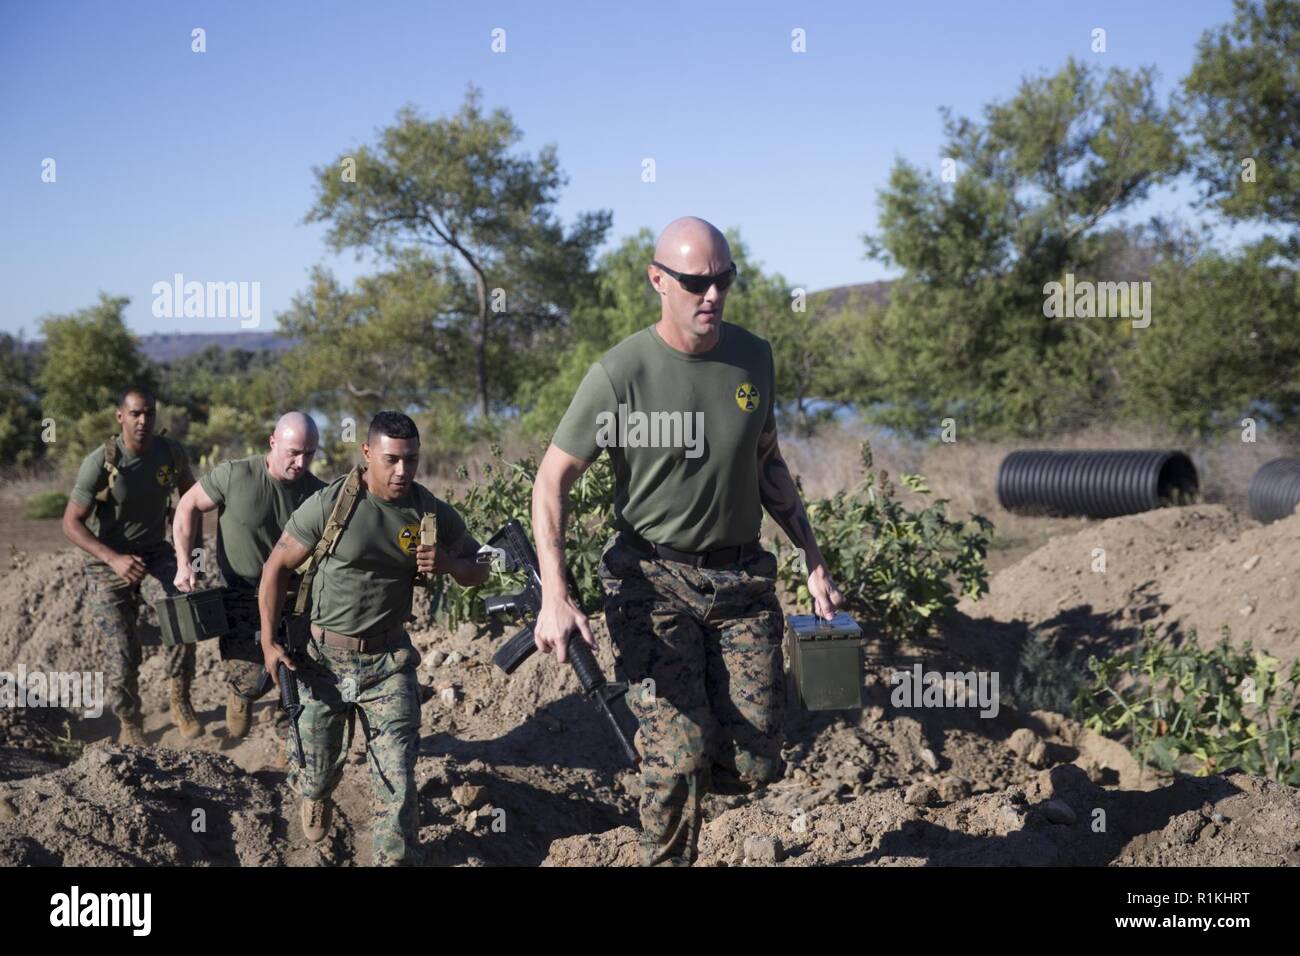 U.S. Marines cross through an obstacle during the Fire Team Challenge as a part of the Commanding General’s (CG’s) Cup at Lake O’Neill, Marine Corps Base Camp Pendleton, California, Oct. 17, 2018. The CG’s Cup is an intramural sports program that was developed to give service members from various units across MCB Camp Pendleton an opportunity to compete in organized sporting events in order to promote fitness, teamwork and esprit de corps. The CG’s cup also allows service members to earn points for their units, resulting in prizes and awards that are presented to the top-earning units at the c Stock Photo